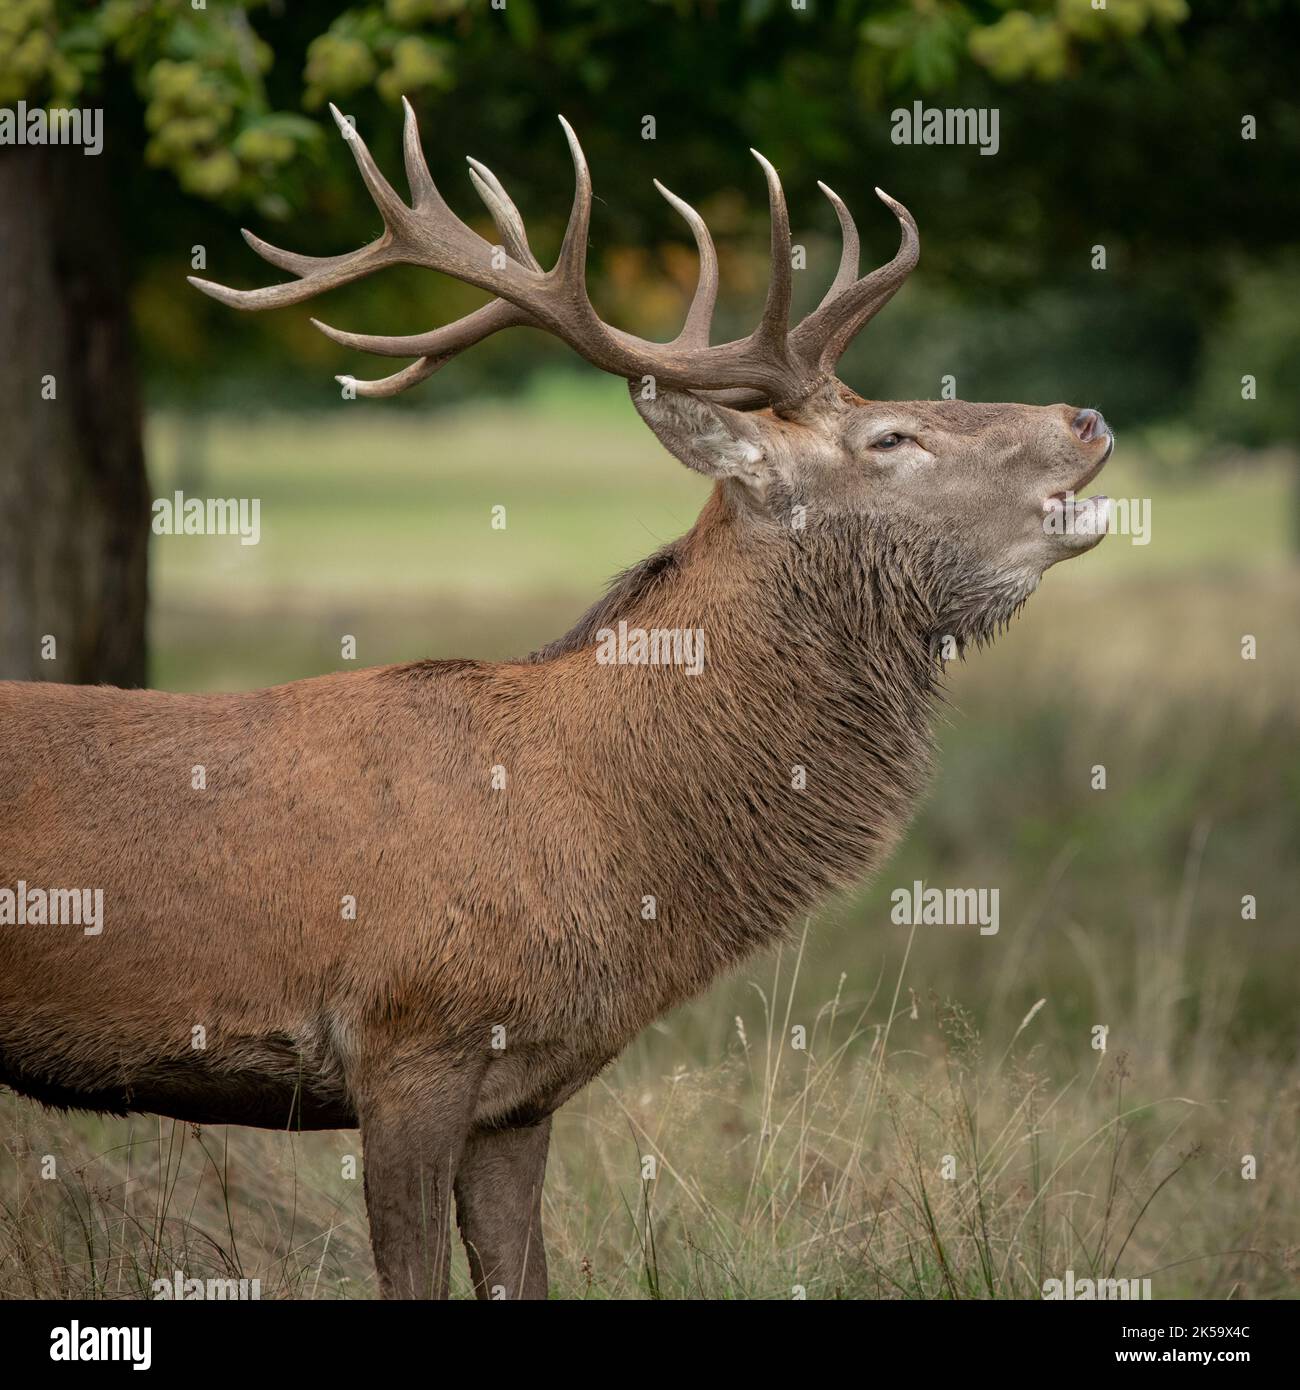 Close up portrait of a red deer stag bellowing. It shows the front half of the animal complete with antlers Stock Photo